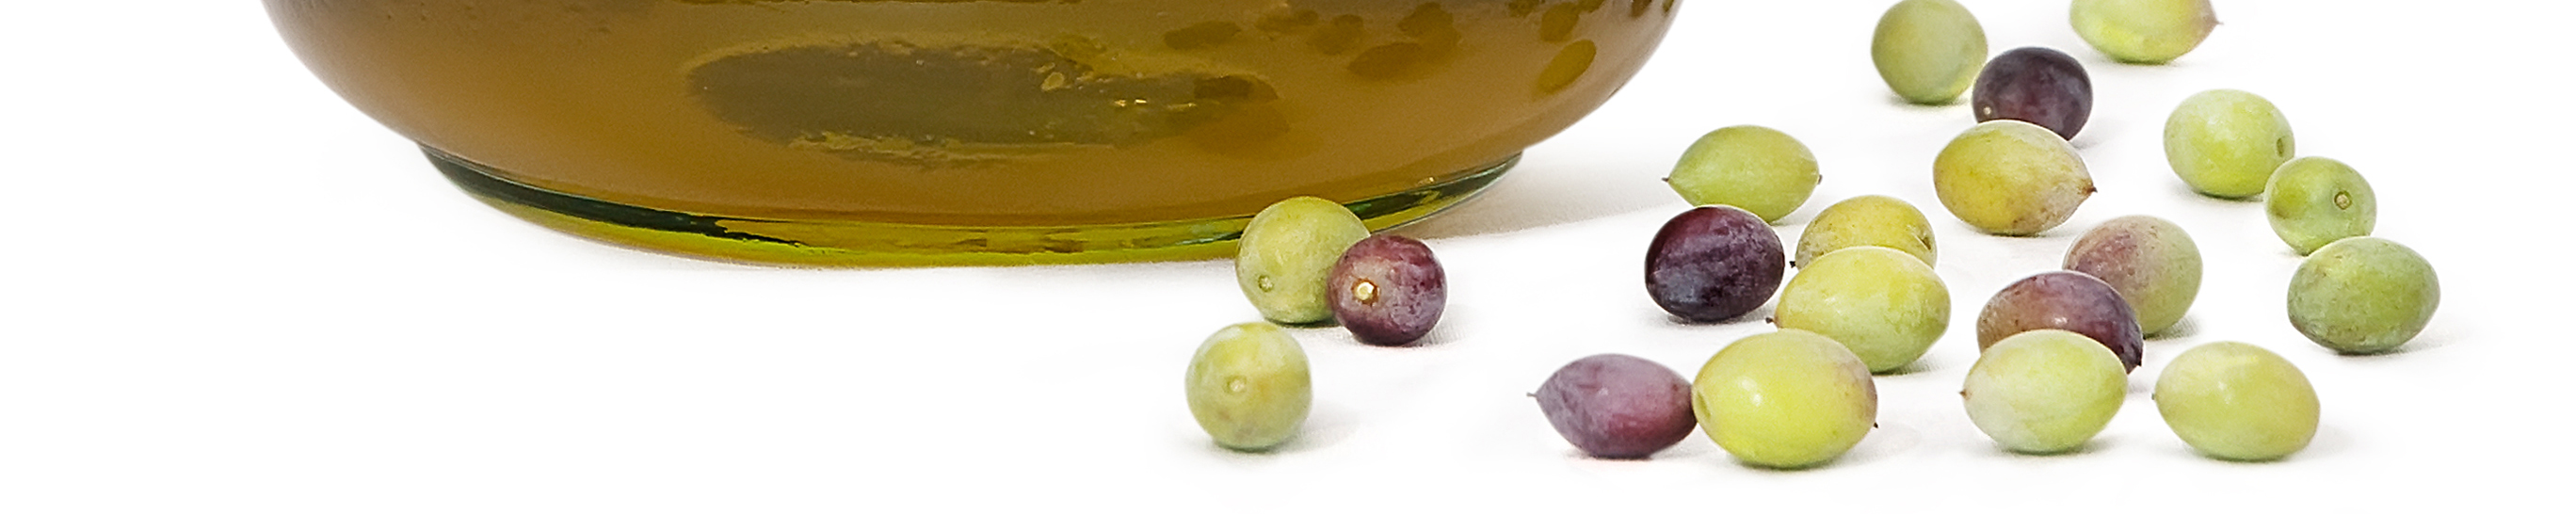 Olive oil and multi-coloured olive fruits scattered